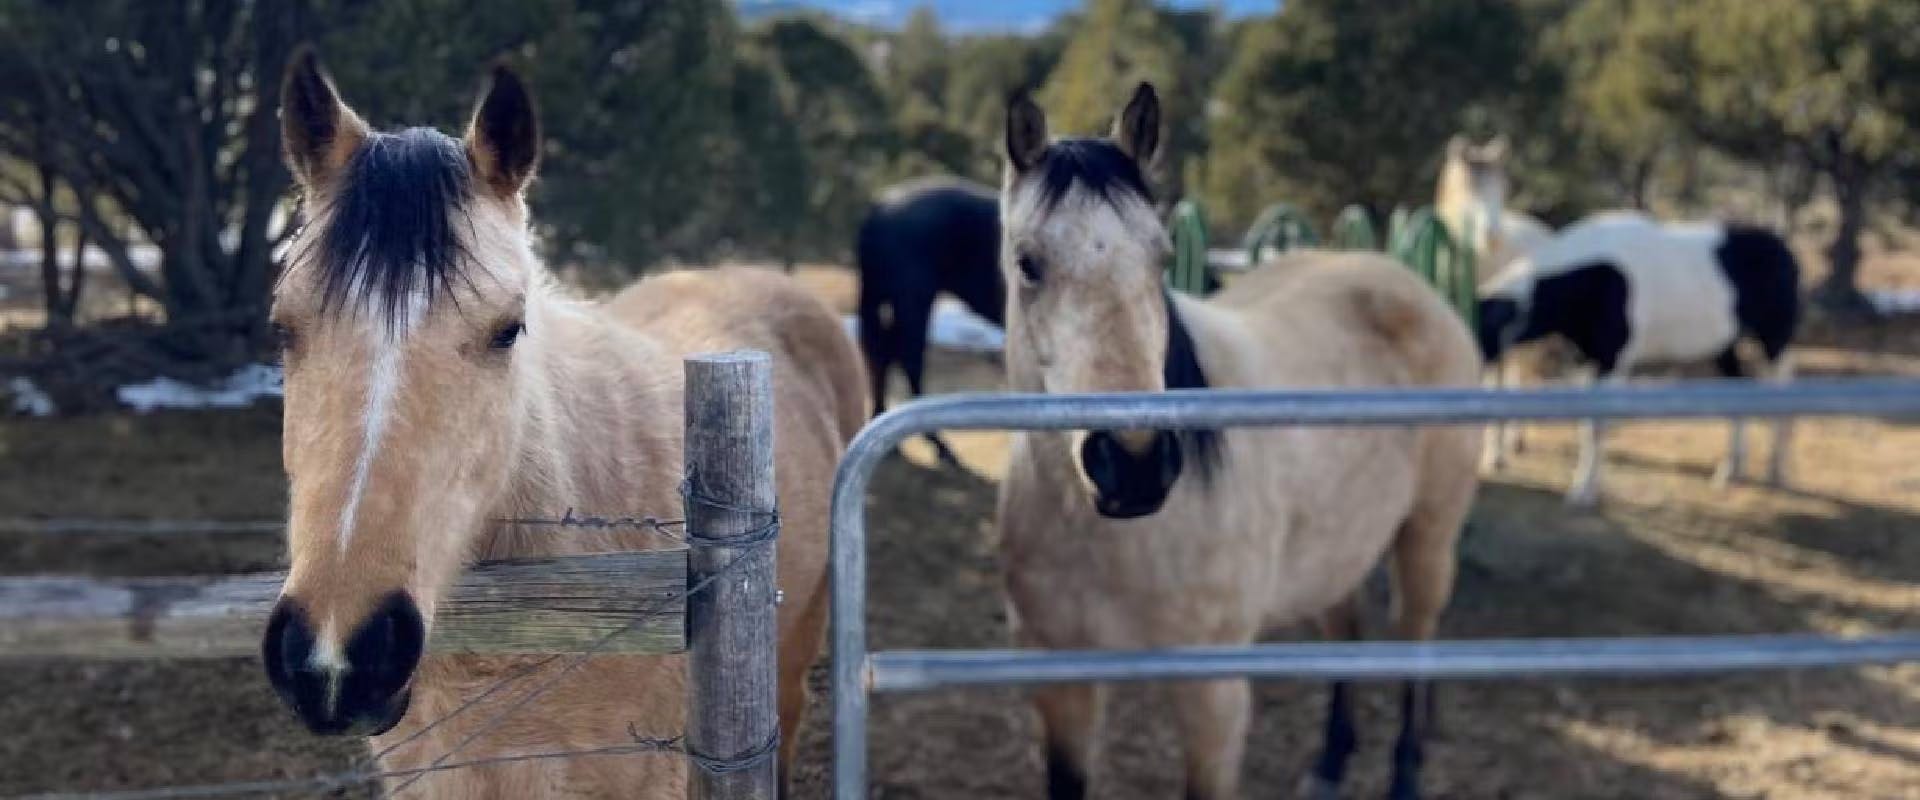 Horses stood next to a gate in a field